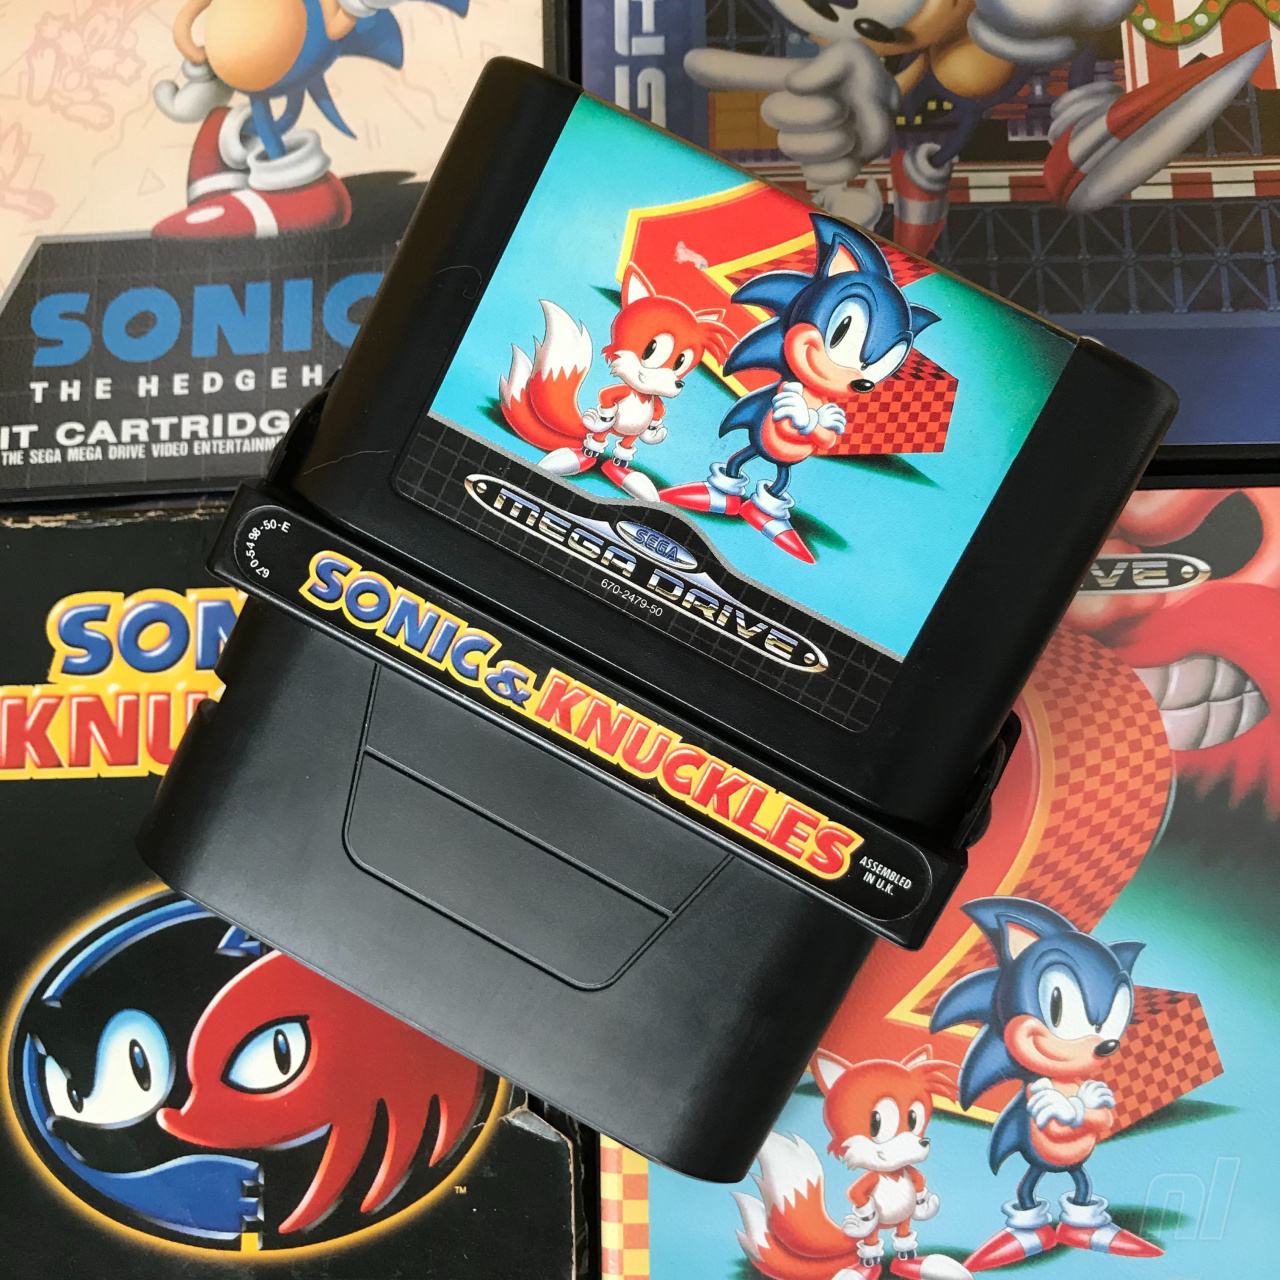 Sonic the Hedgehog 2 for Nintendo Switch adds new features to the